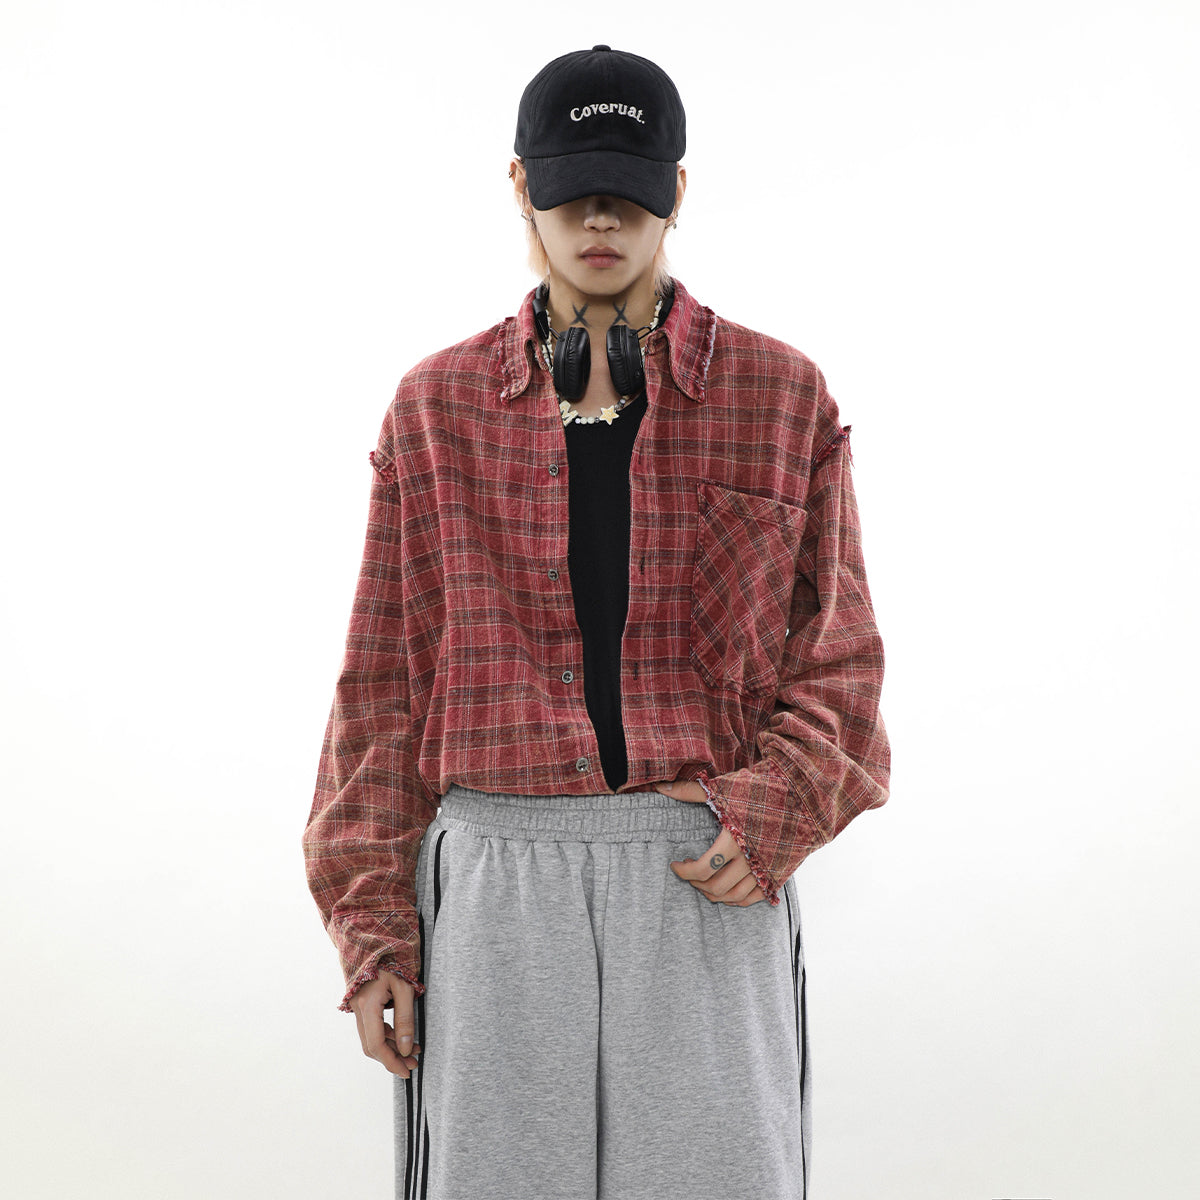 Mr Nearly Vintage Distressed Style Plaid Shirt Korean Street Fashion Shirt By Mr Nearly Shop Online at OH Vault